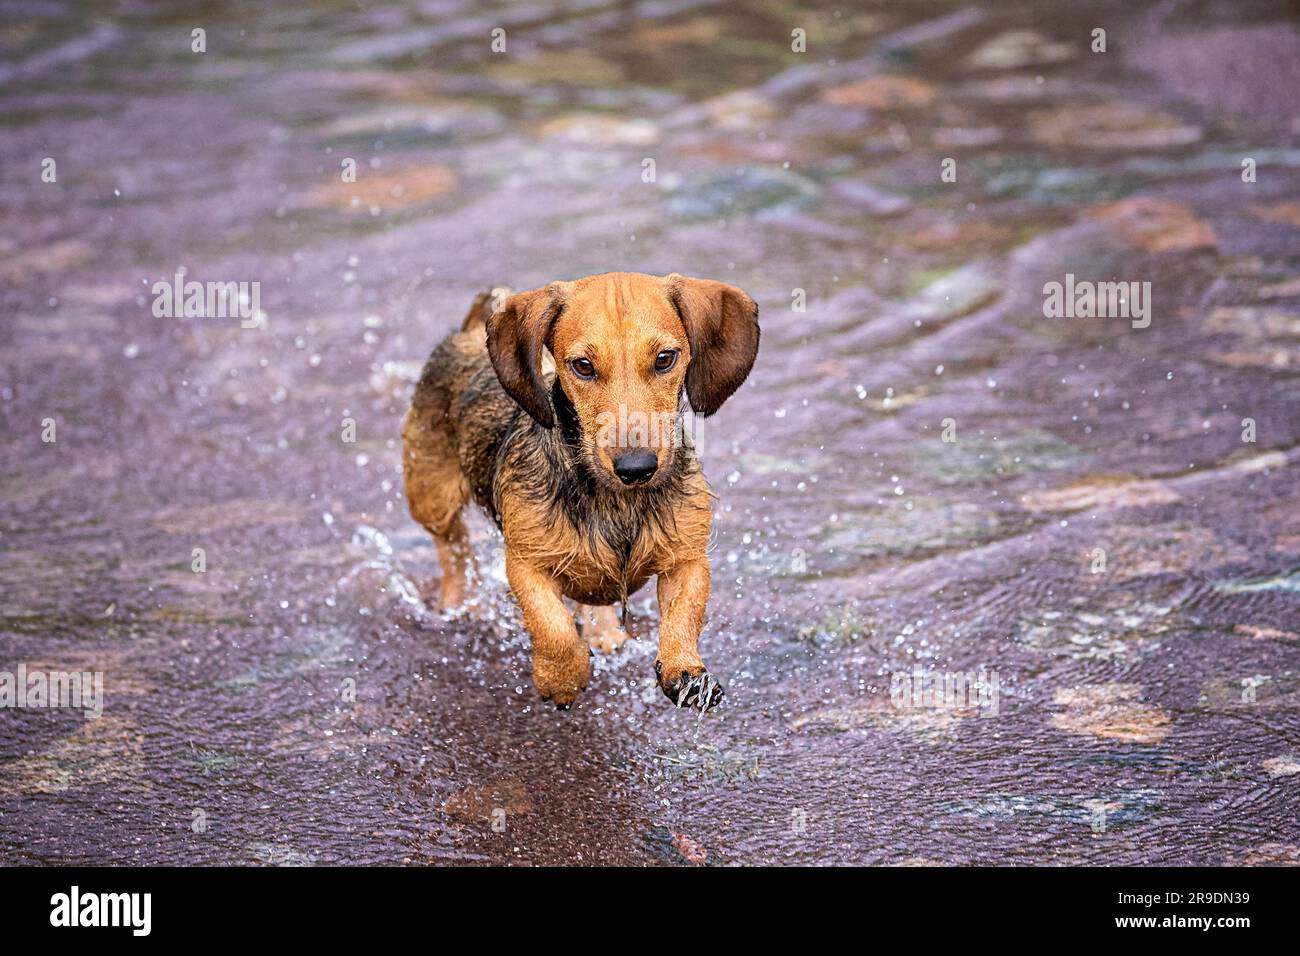 Wire-haired Dachshund. Adult dog running in a large puddle. Germany Stock Photo